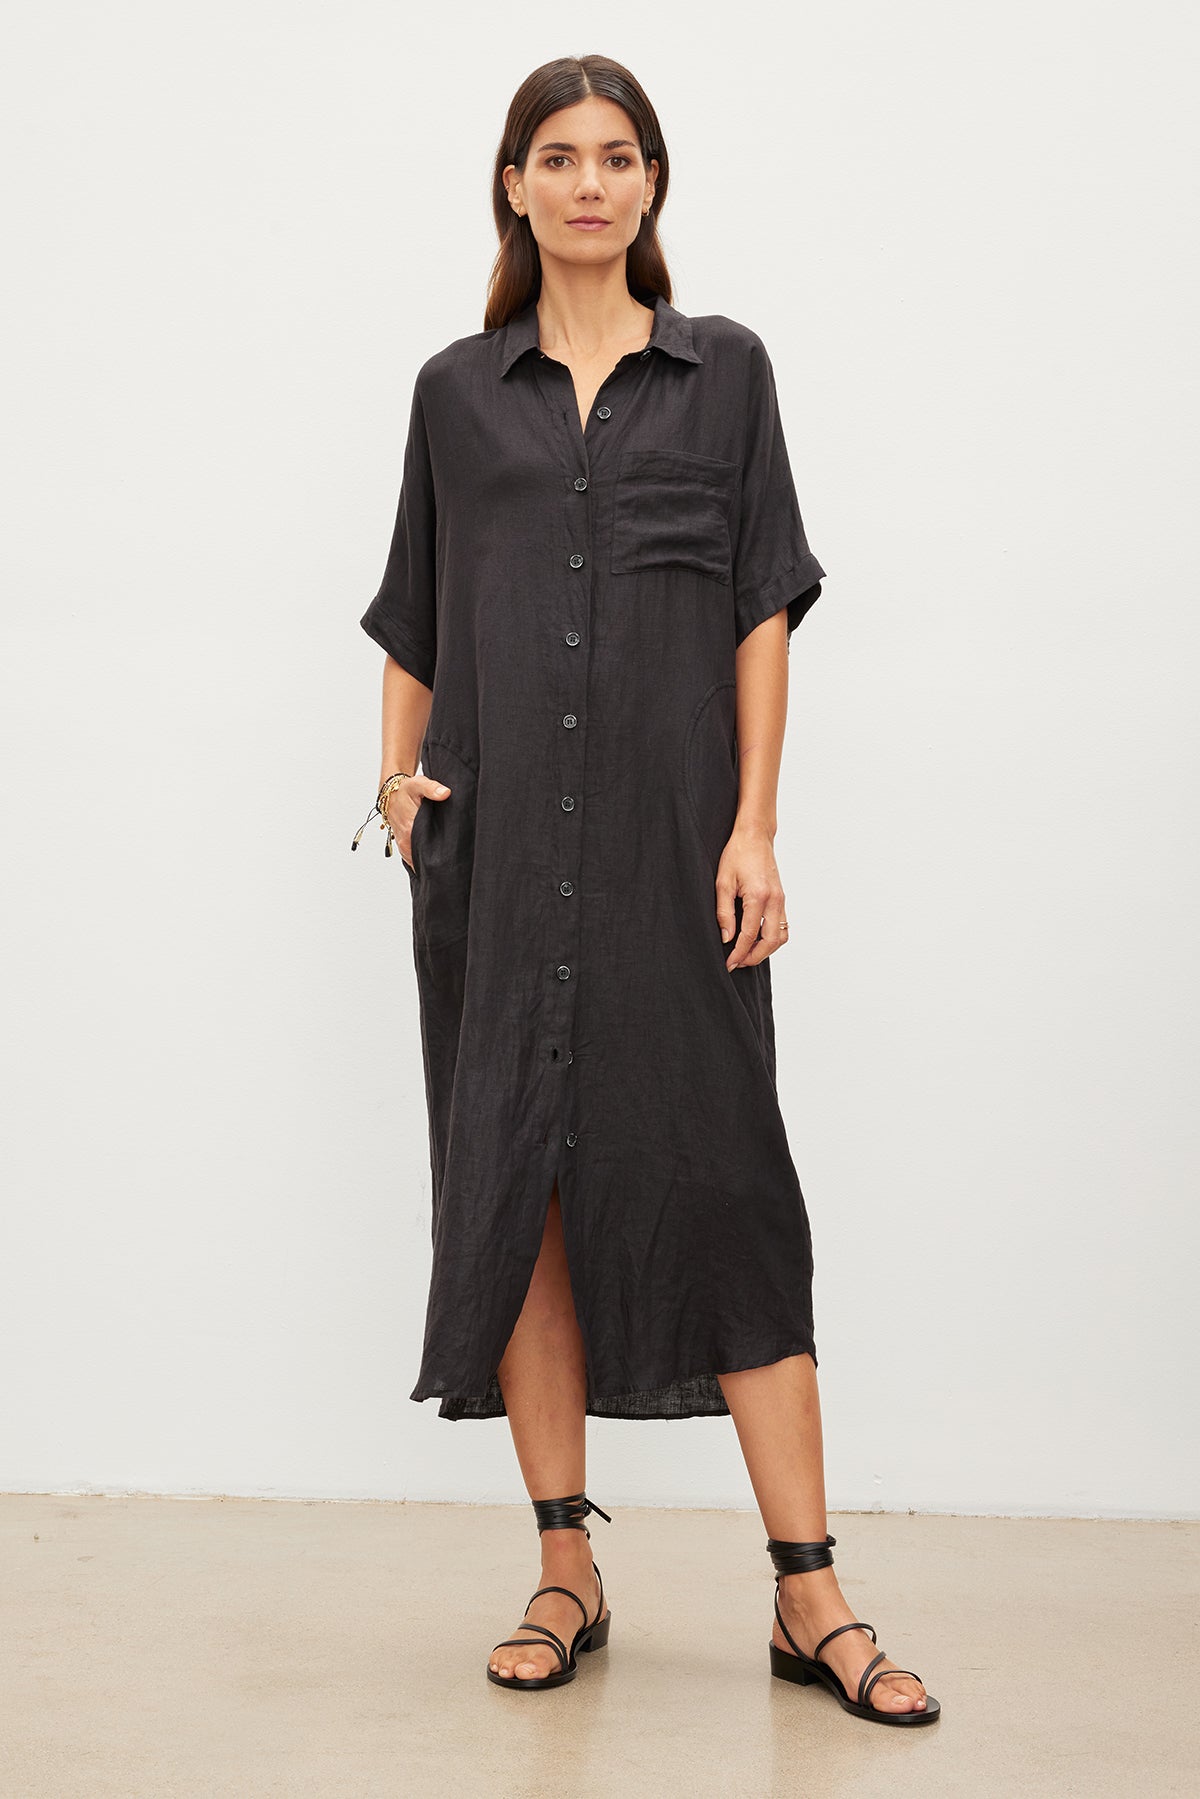   A woman standing in a studio, wearing a Velvet by Graham & Spencer SANDRA LINEN BUTTON-UP DRESS and black sandals, holding sunglasses in one hand. 